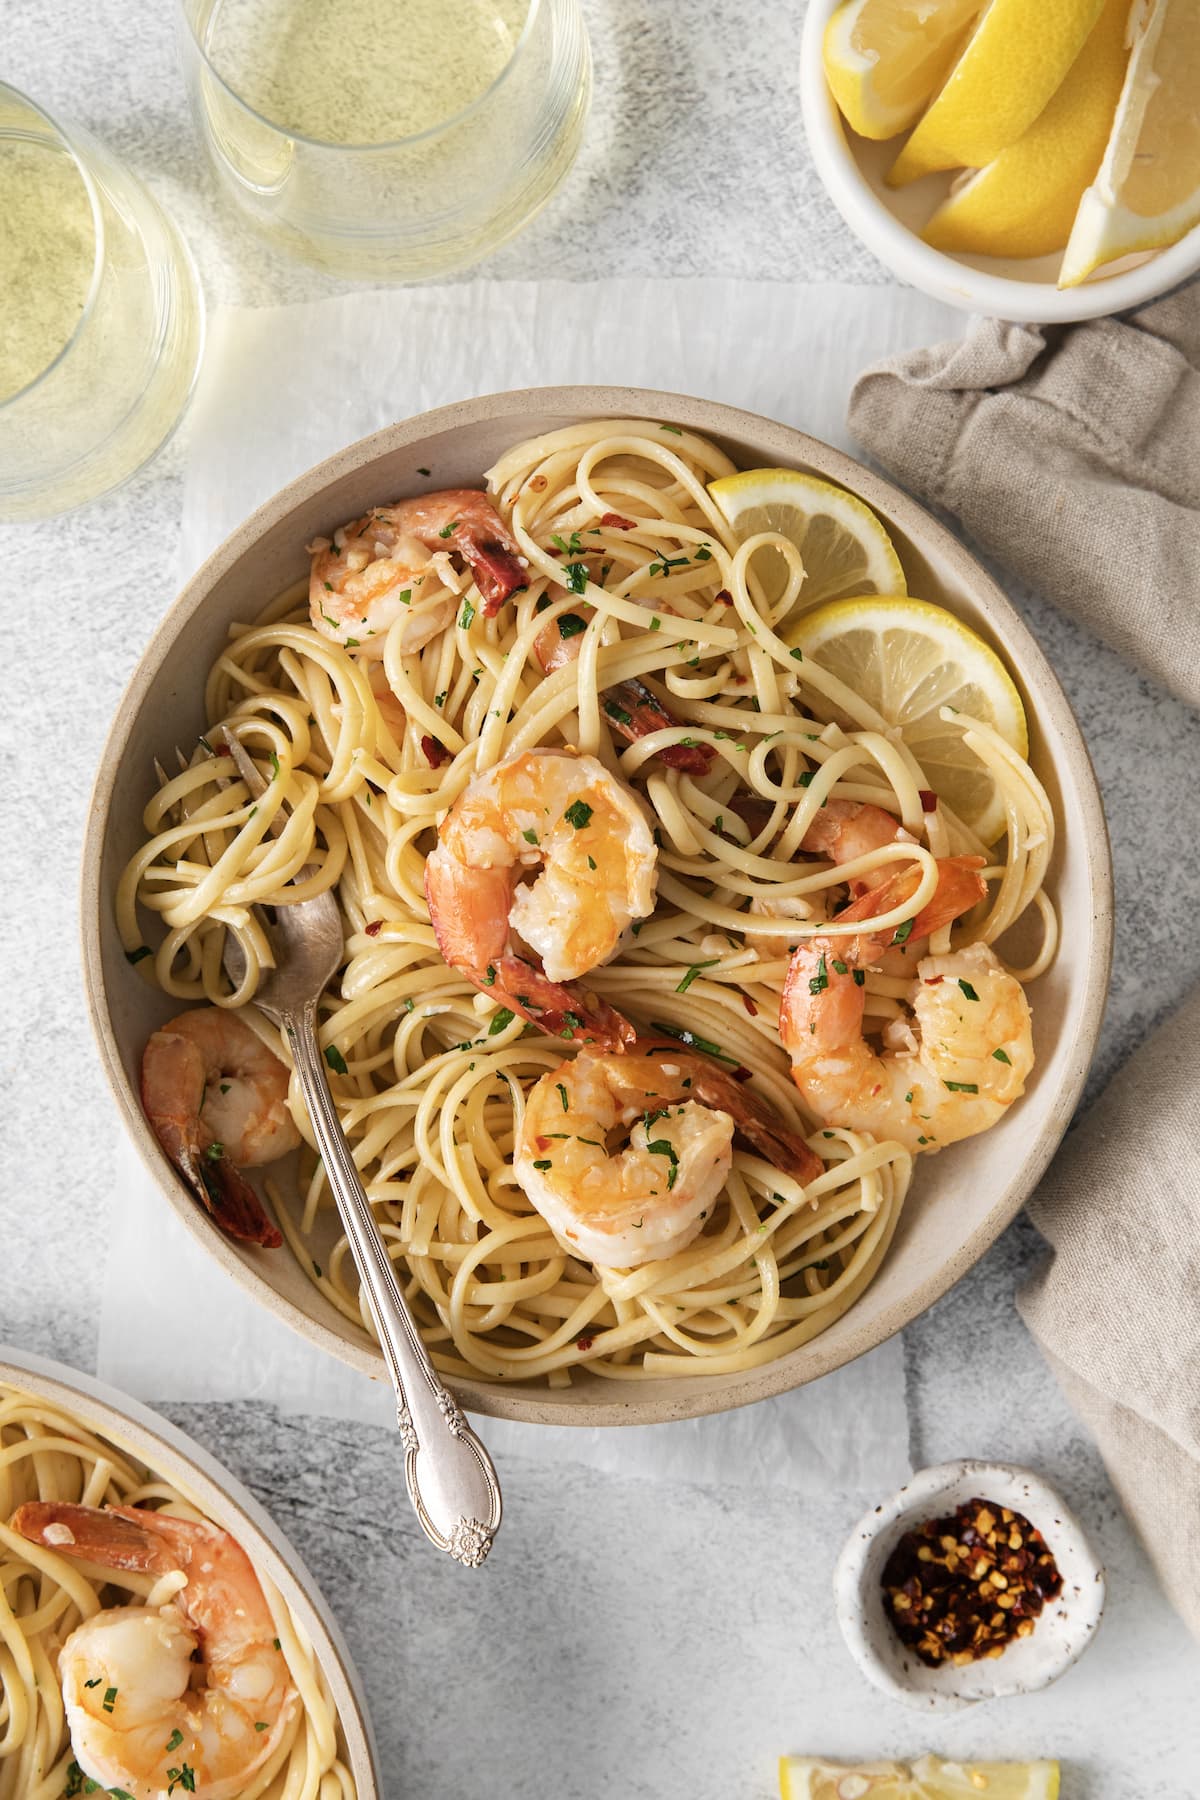 shrimp pasta with linguine, red pepper flakes, herbs, and lemon slices in a bowl